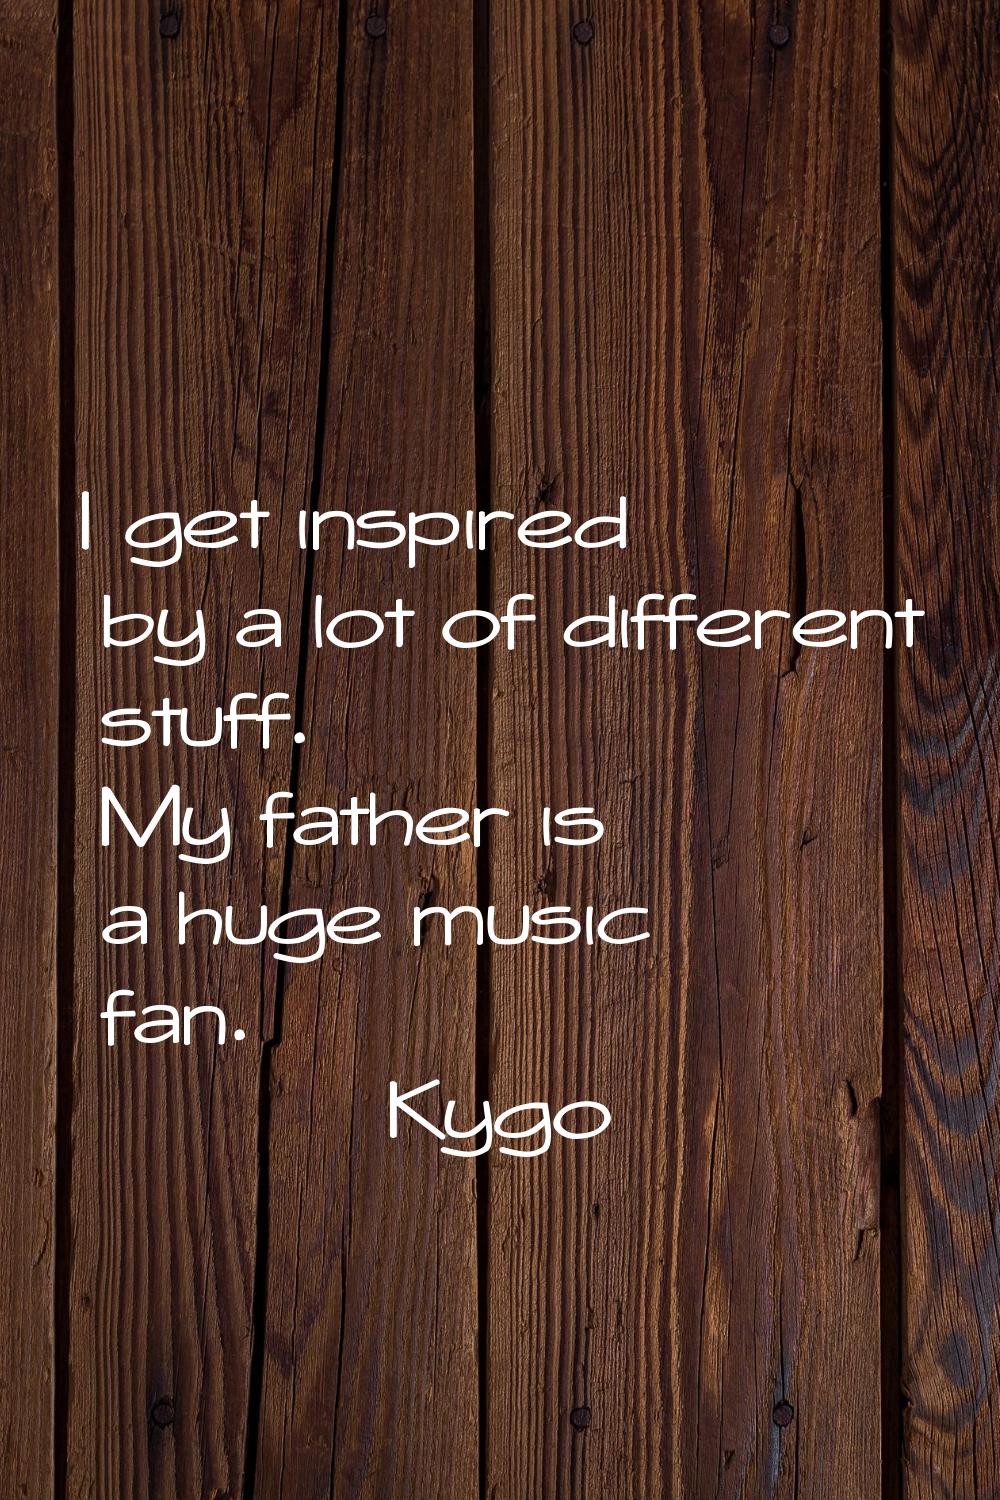 I get inspired by a lot of different stuff. My father is a huge music fan.